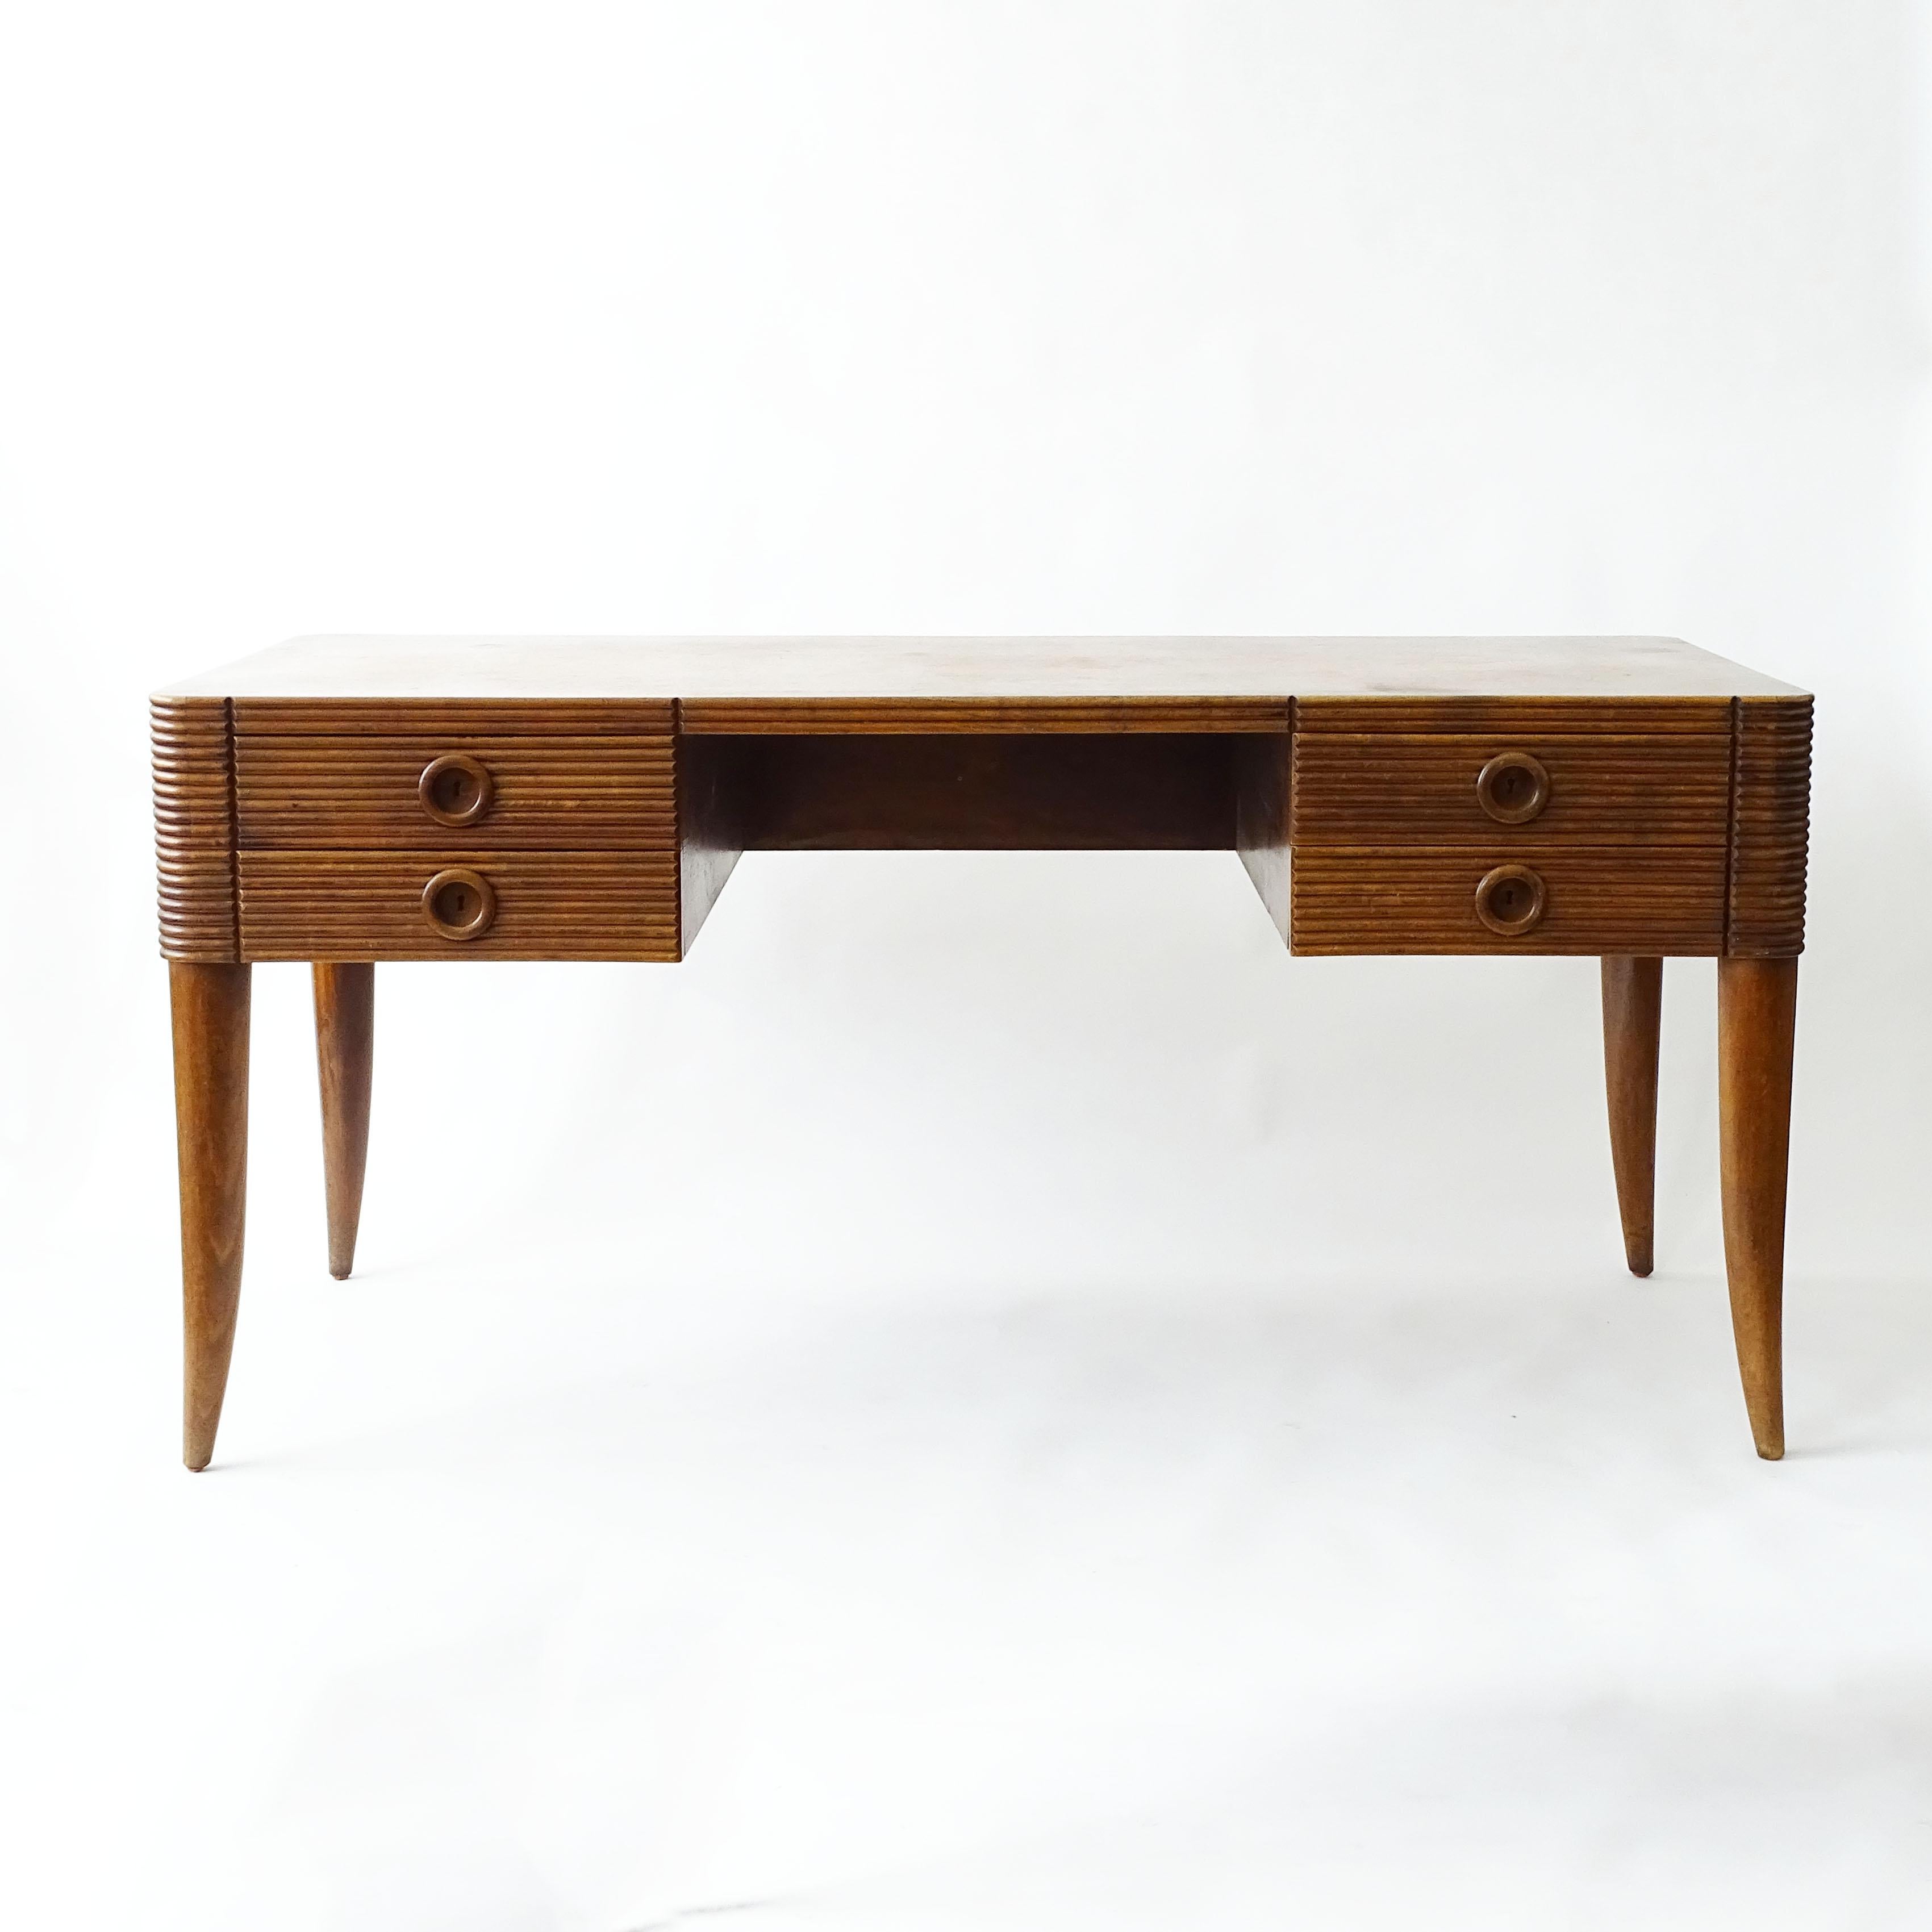 Wood Paolo Buffa grissinato wood desk with four drawers, Italy 1940s For Sale